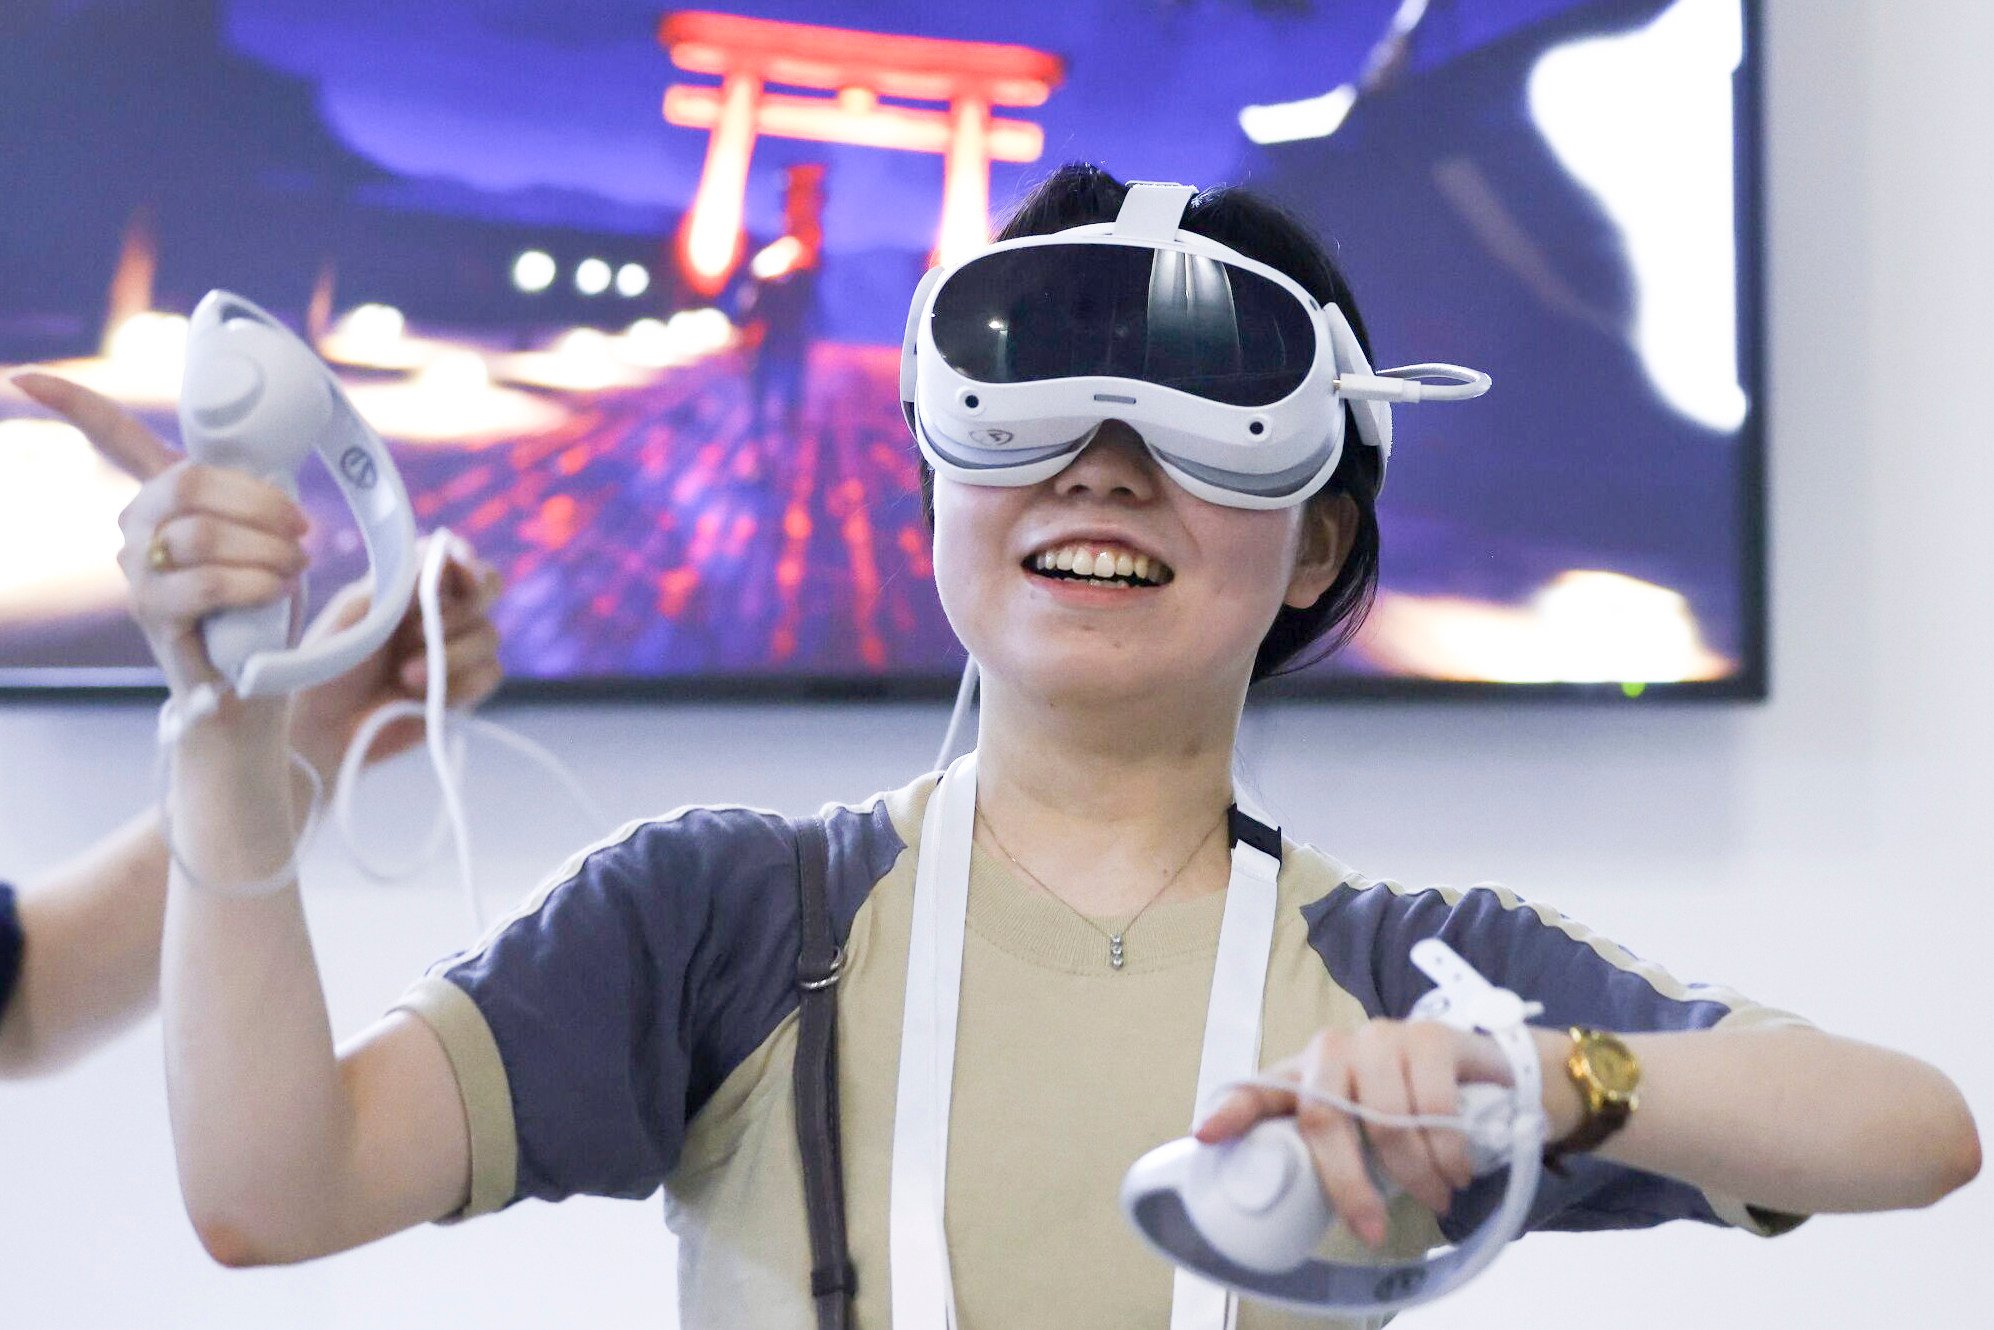 An attendee wears a Pico 4 virtual reality headset to play a video game inside the Pico booth at the Tokyo Game Show in Chiba, Japan, on September 21, 2023. Photo: Bloomberg